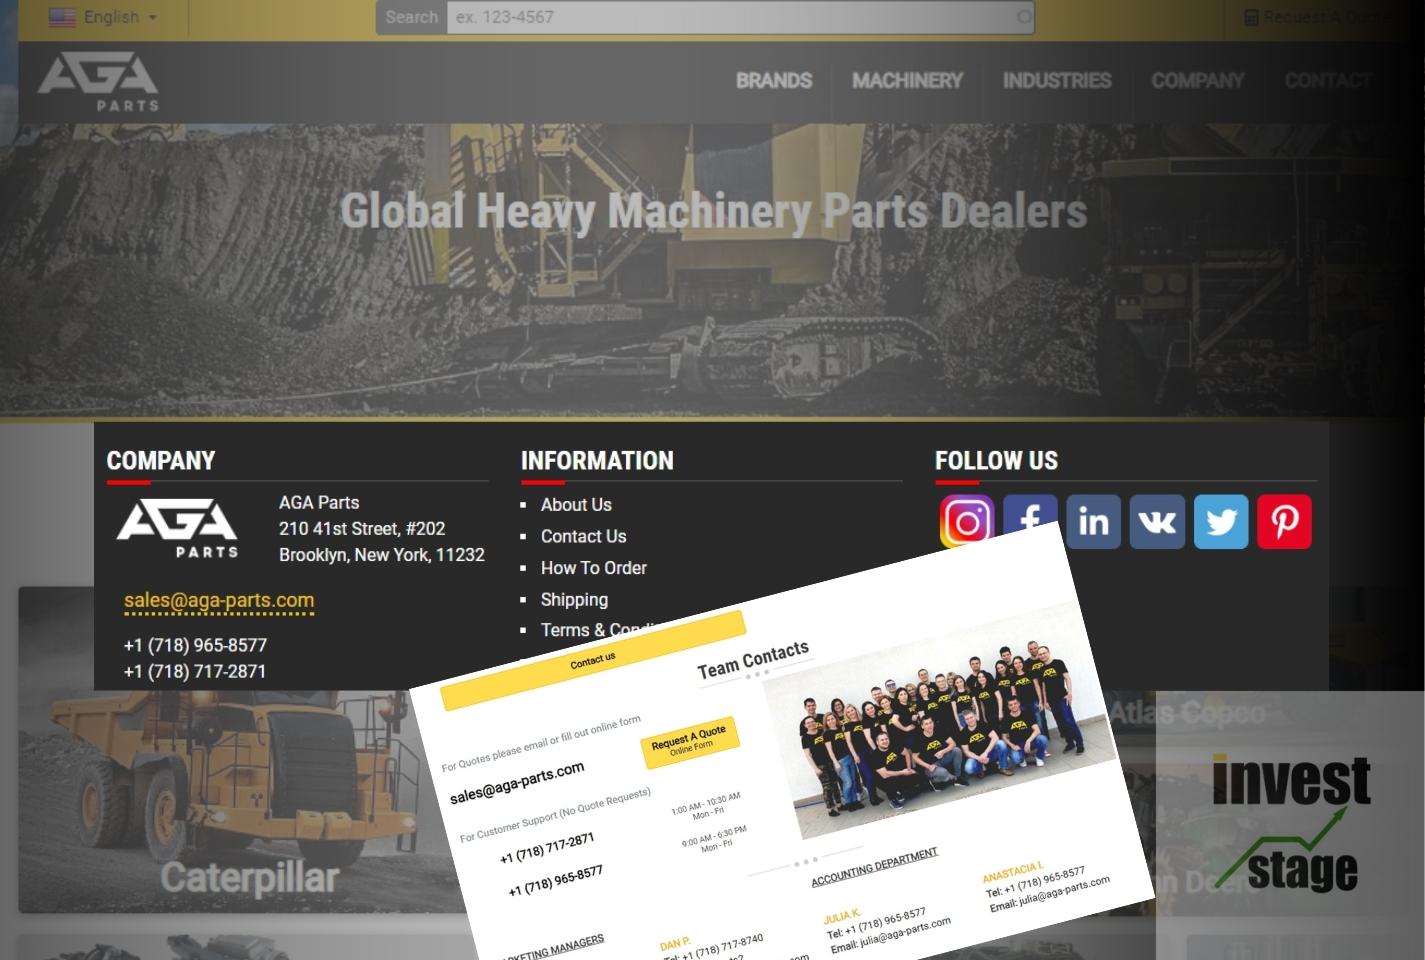 AGA Parts: A Global Leader in Supplying Spare Parts for Special-Purpose Machinery